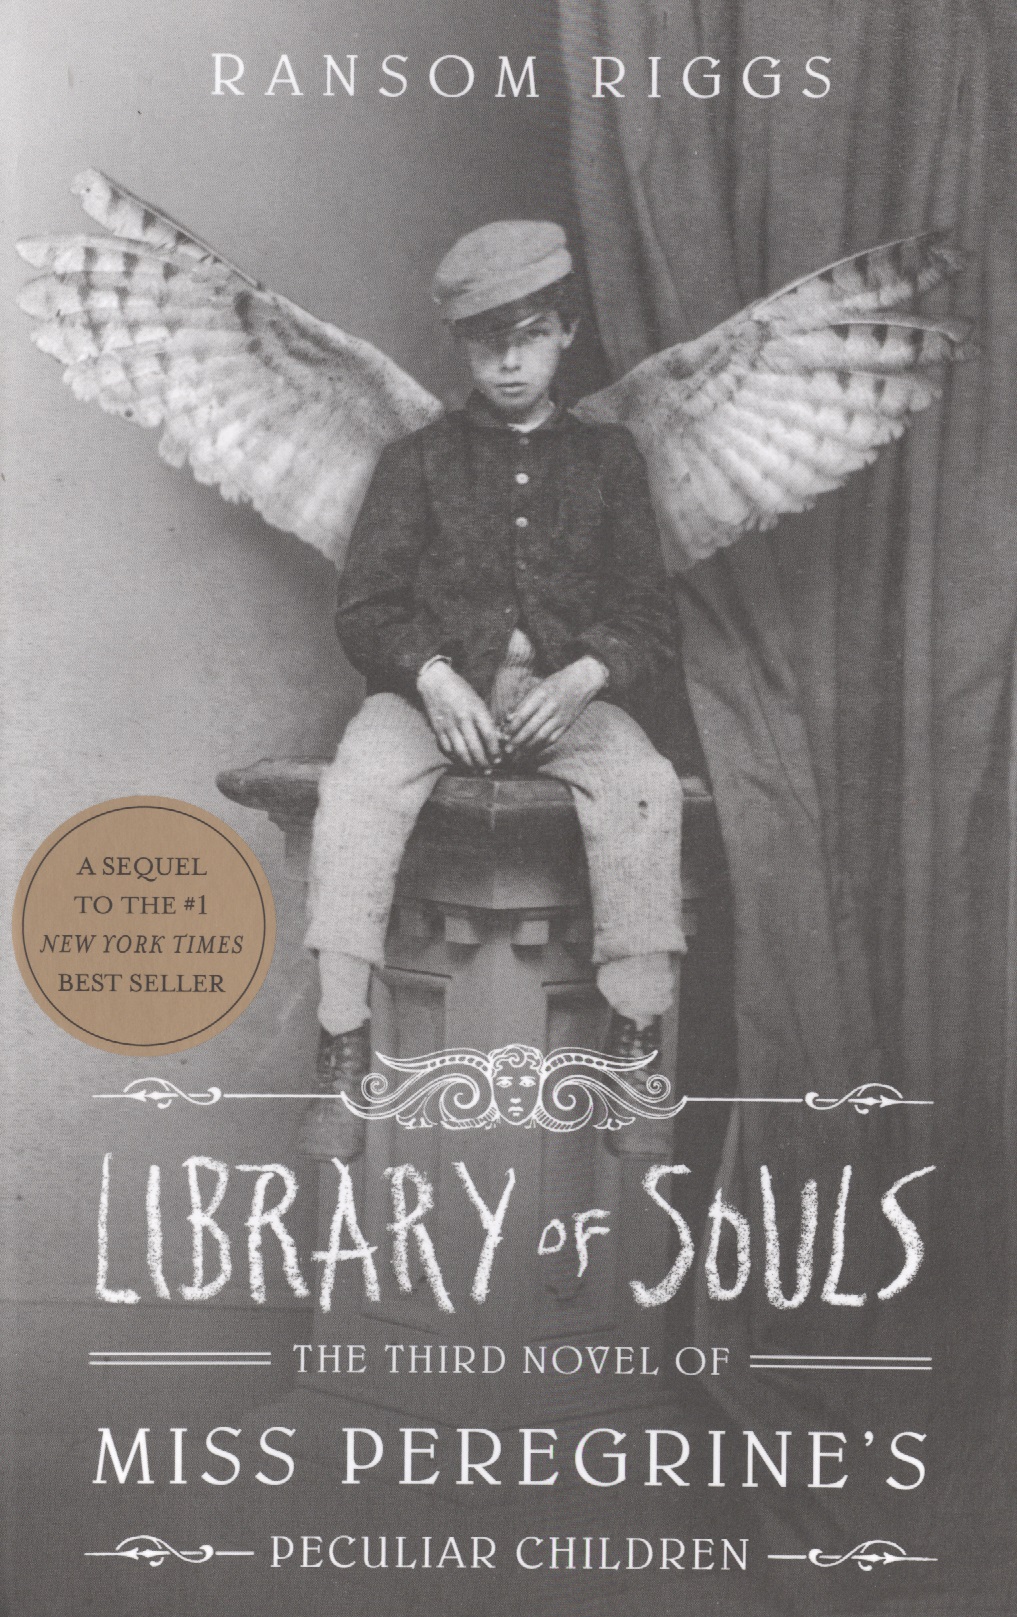 Riggs Ralph M. Library of Souls riggs r miss peregrine s home for peculiar children